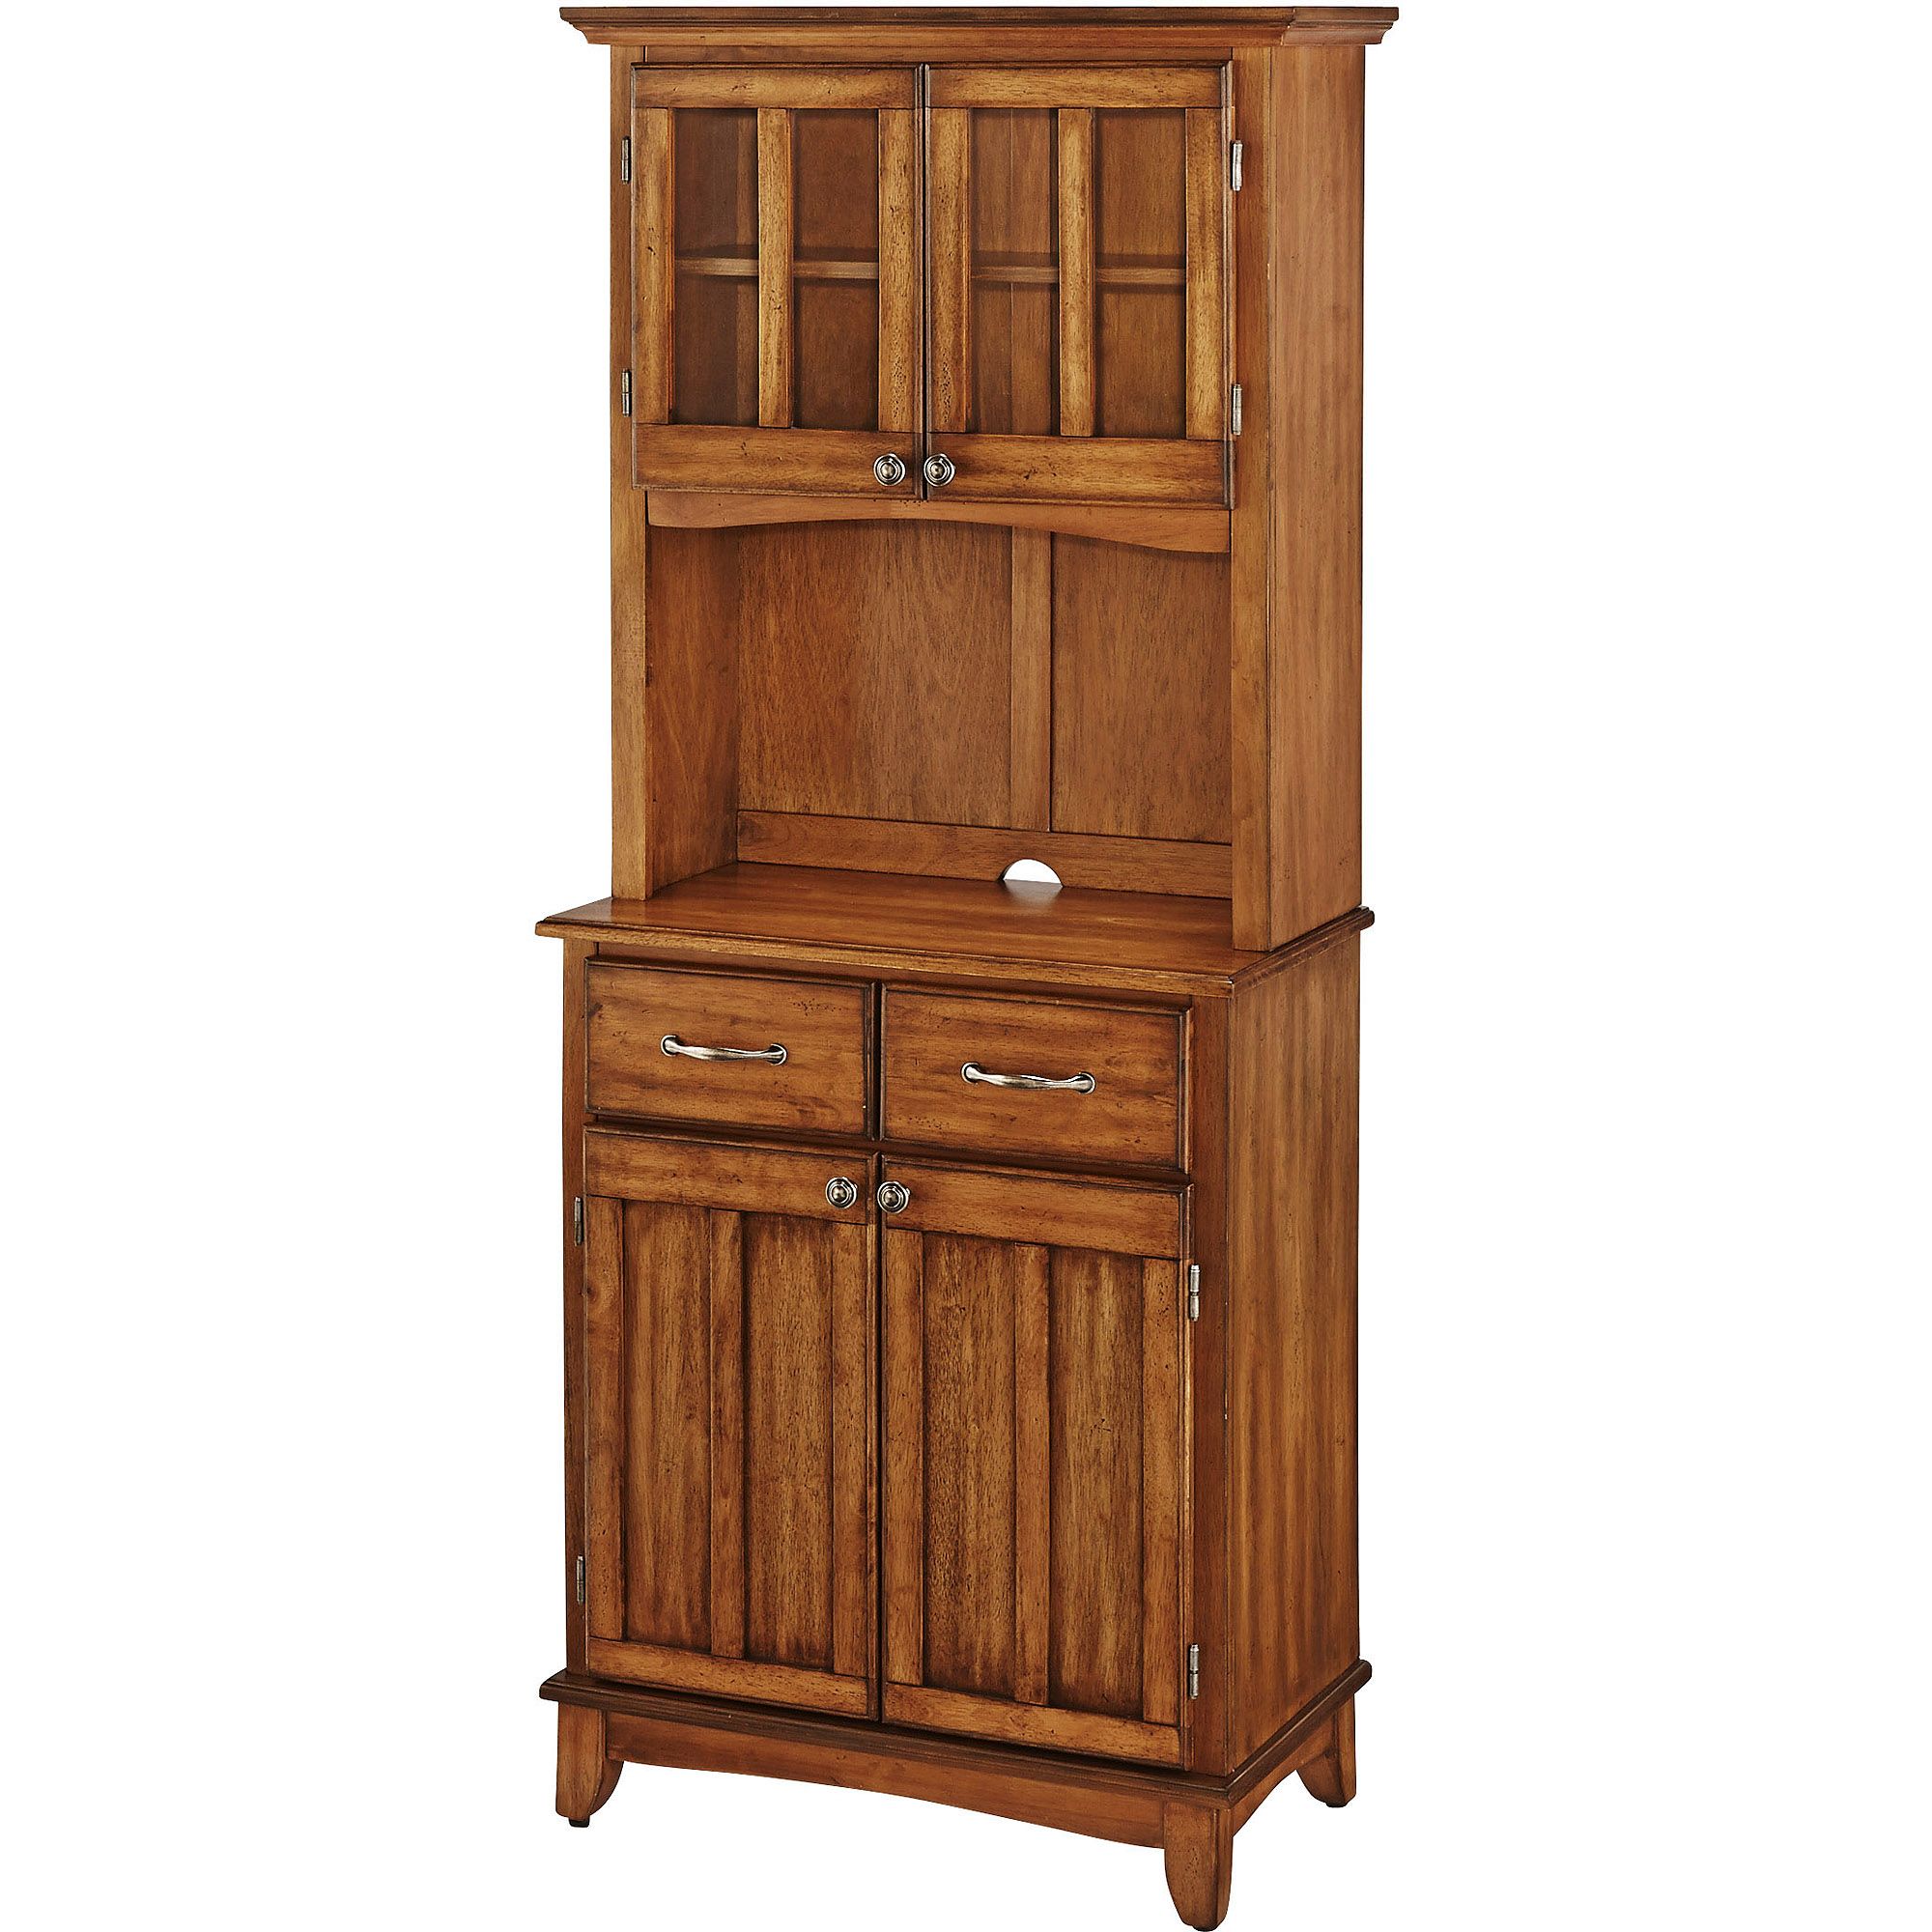 Home Styles Small Buffet With Two Door Hutch, Cottage Oak Finish Inside Wooden Buffets With Two Side Door Storage Cabinets And Stemware Rack (View 11 of 20)